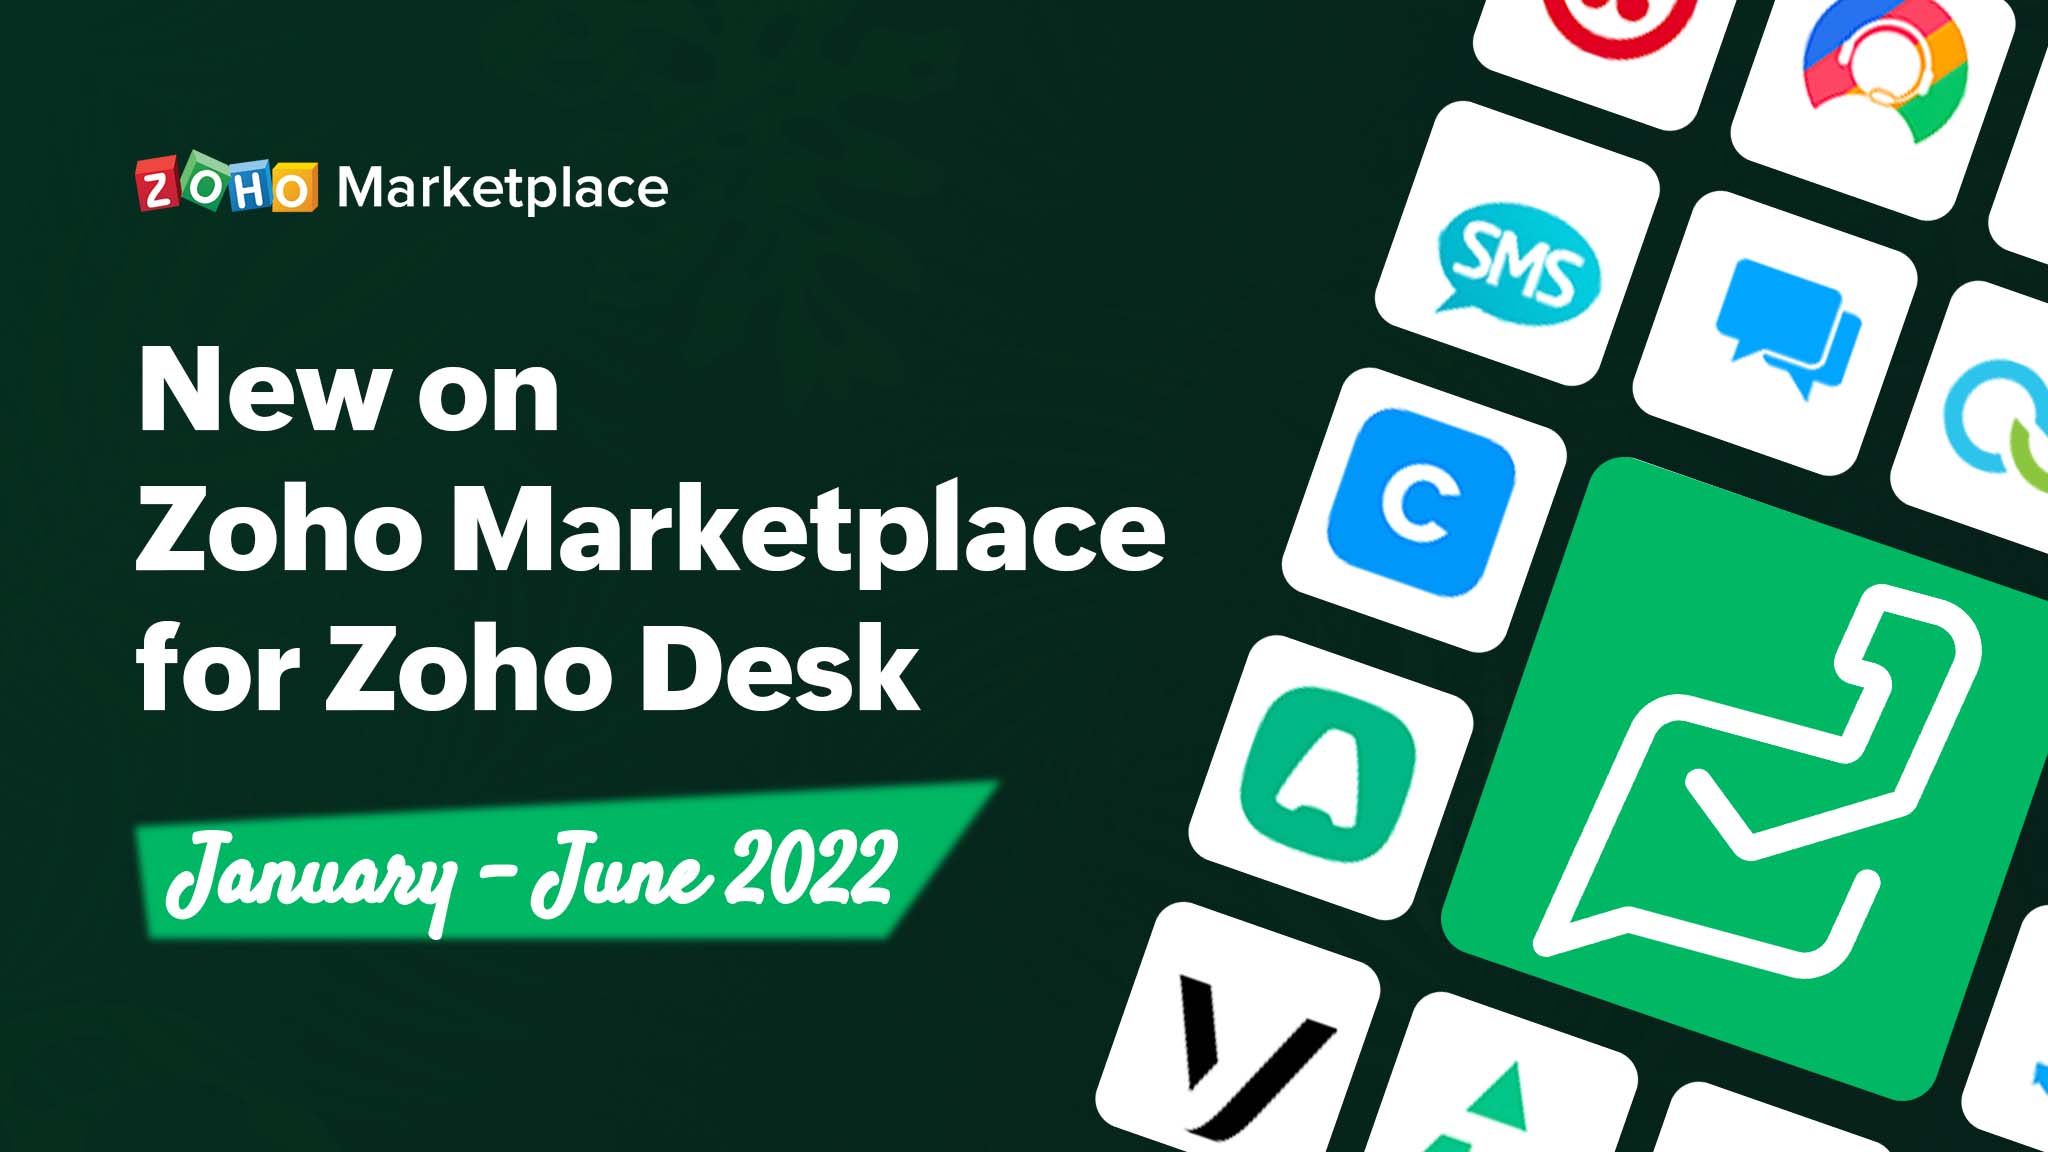 Introducing Aircall, CallHippo, Vonage, Charm, and 33 more extensions for Zoho Desk